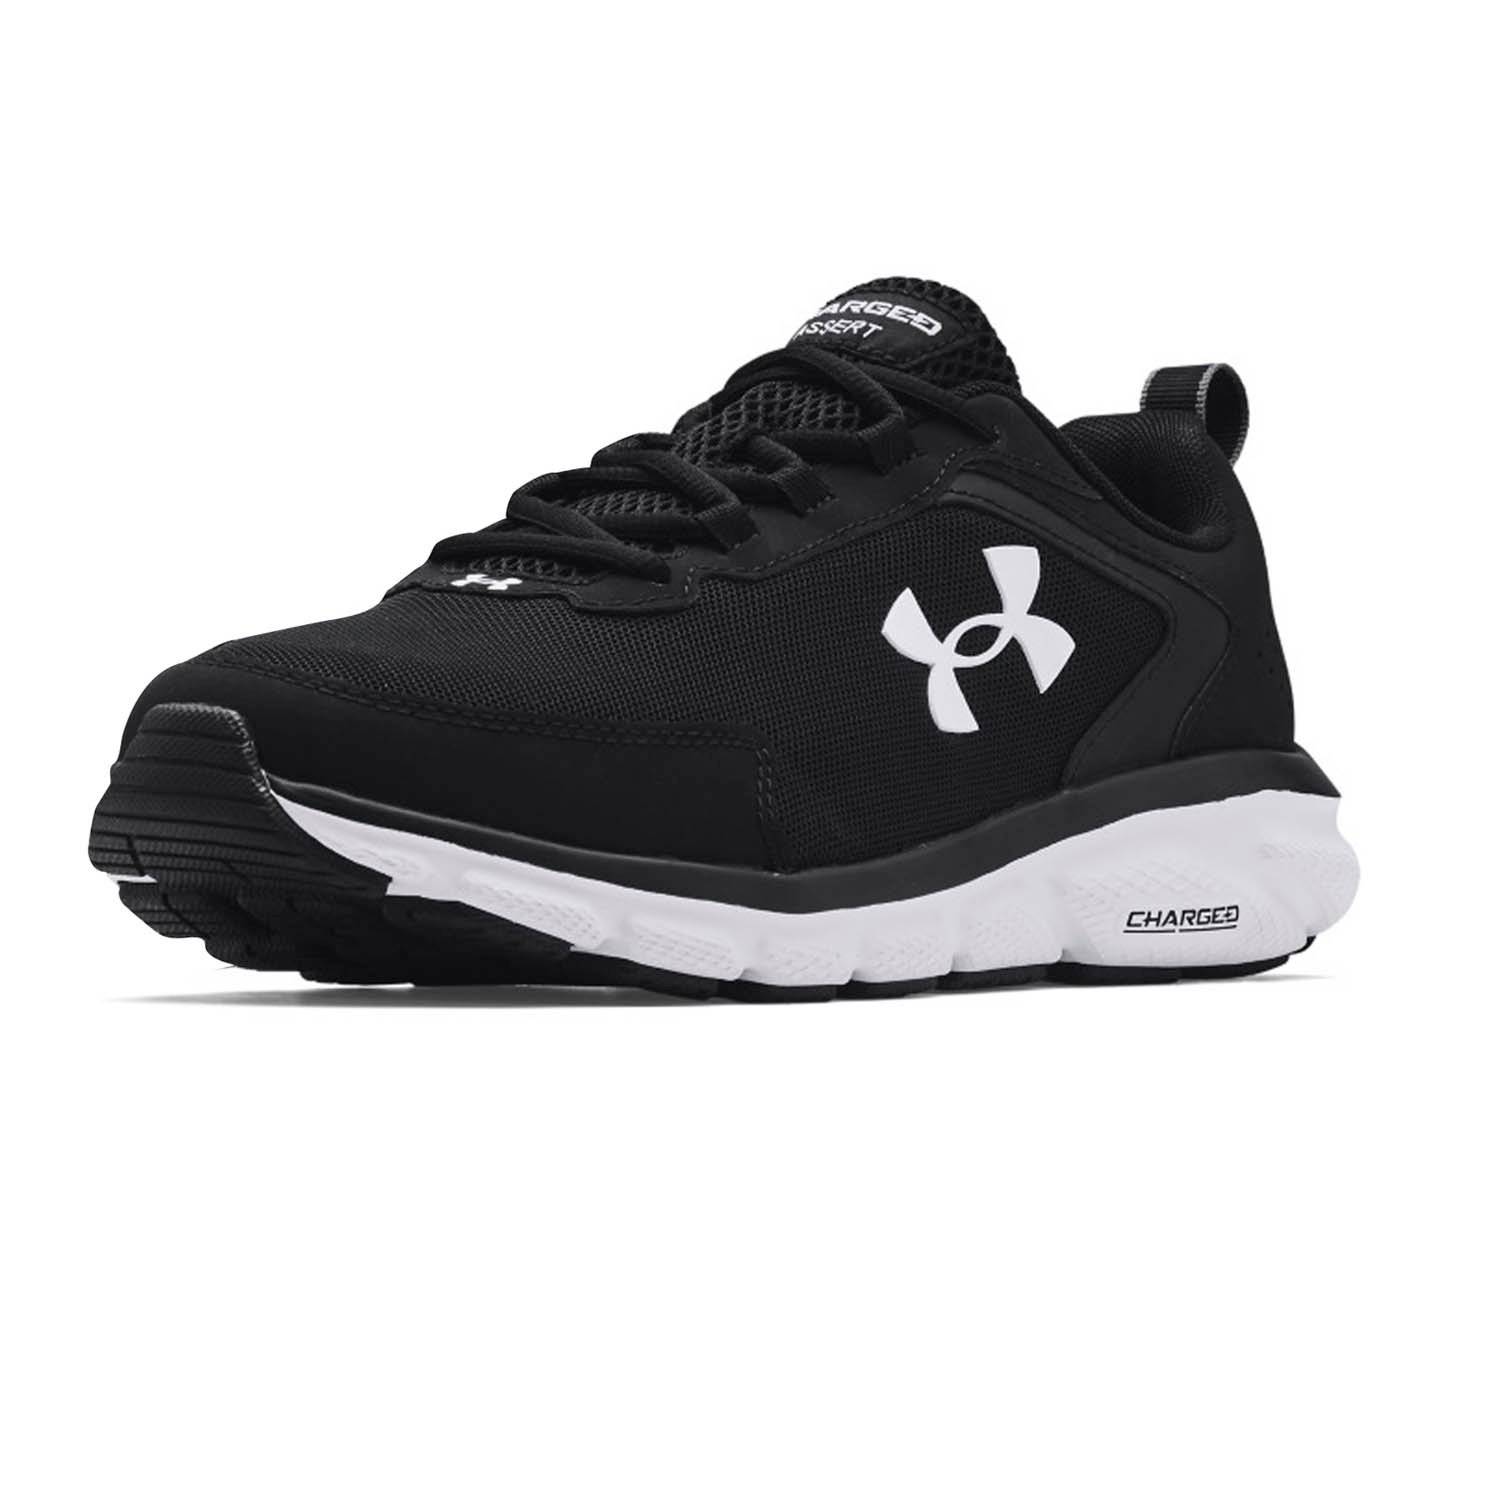 Under Armour Charged Assert 9 Running Shoes